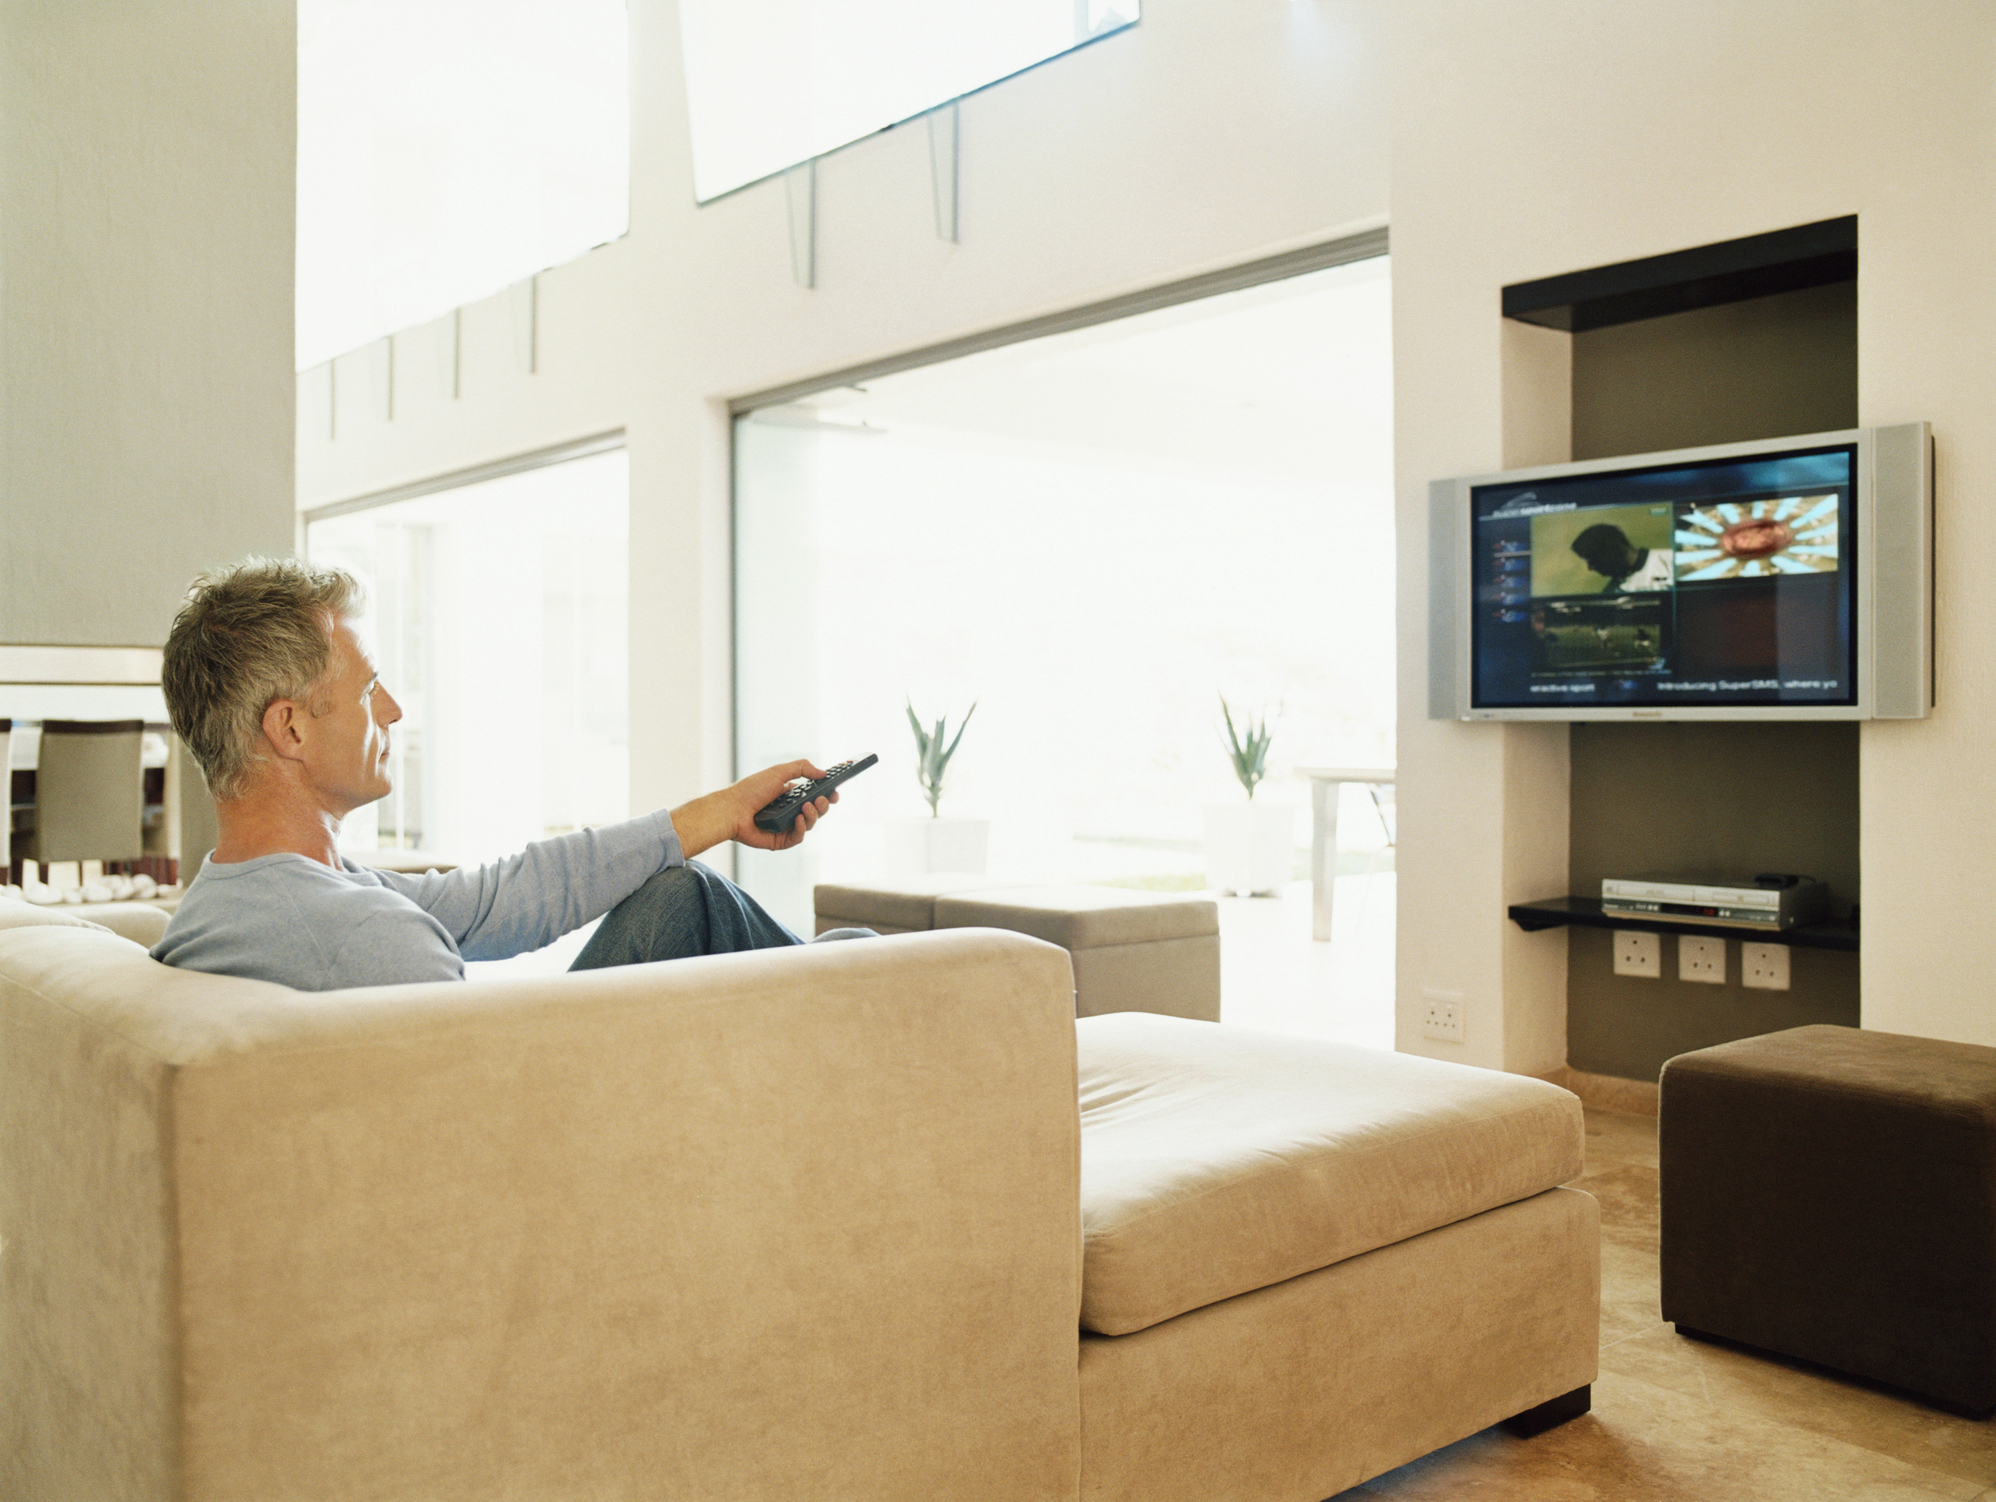 Between Video On Demand linear cable over-the-top content and directly casting personal devices to the guestroom TV which 